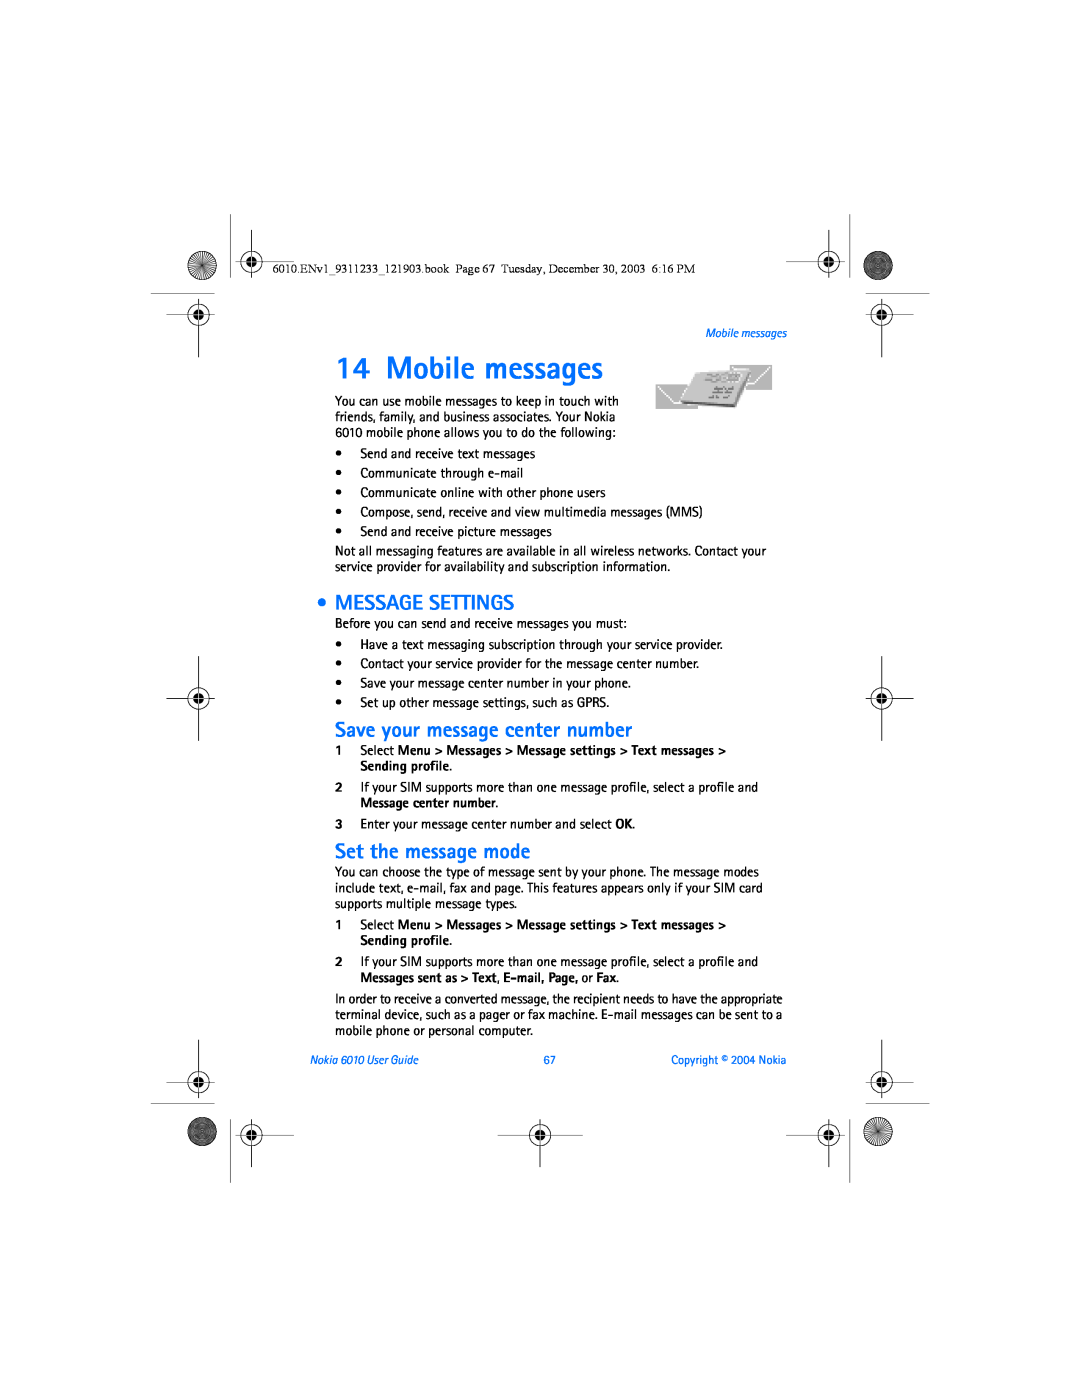 Nokia 6010 manual Mobile messages, Message Settings, Save your message center number, Set the message mode 